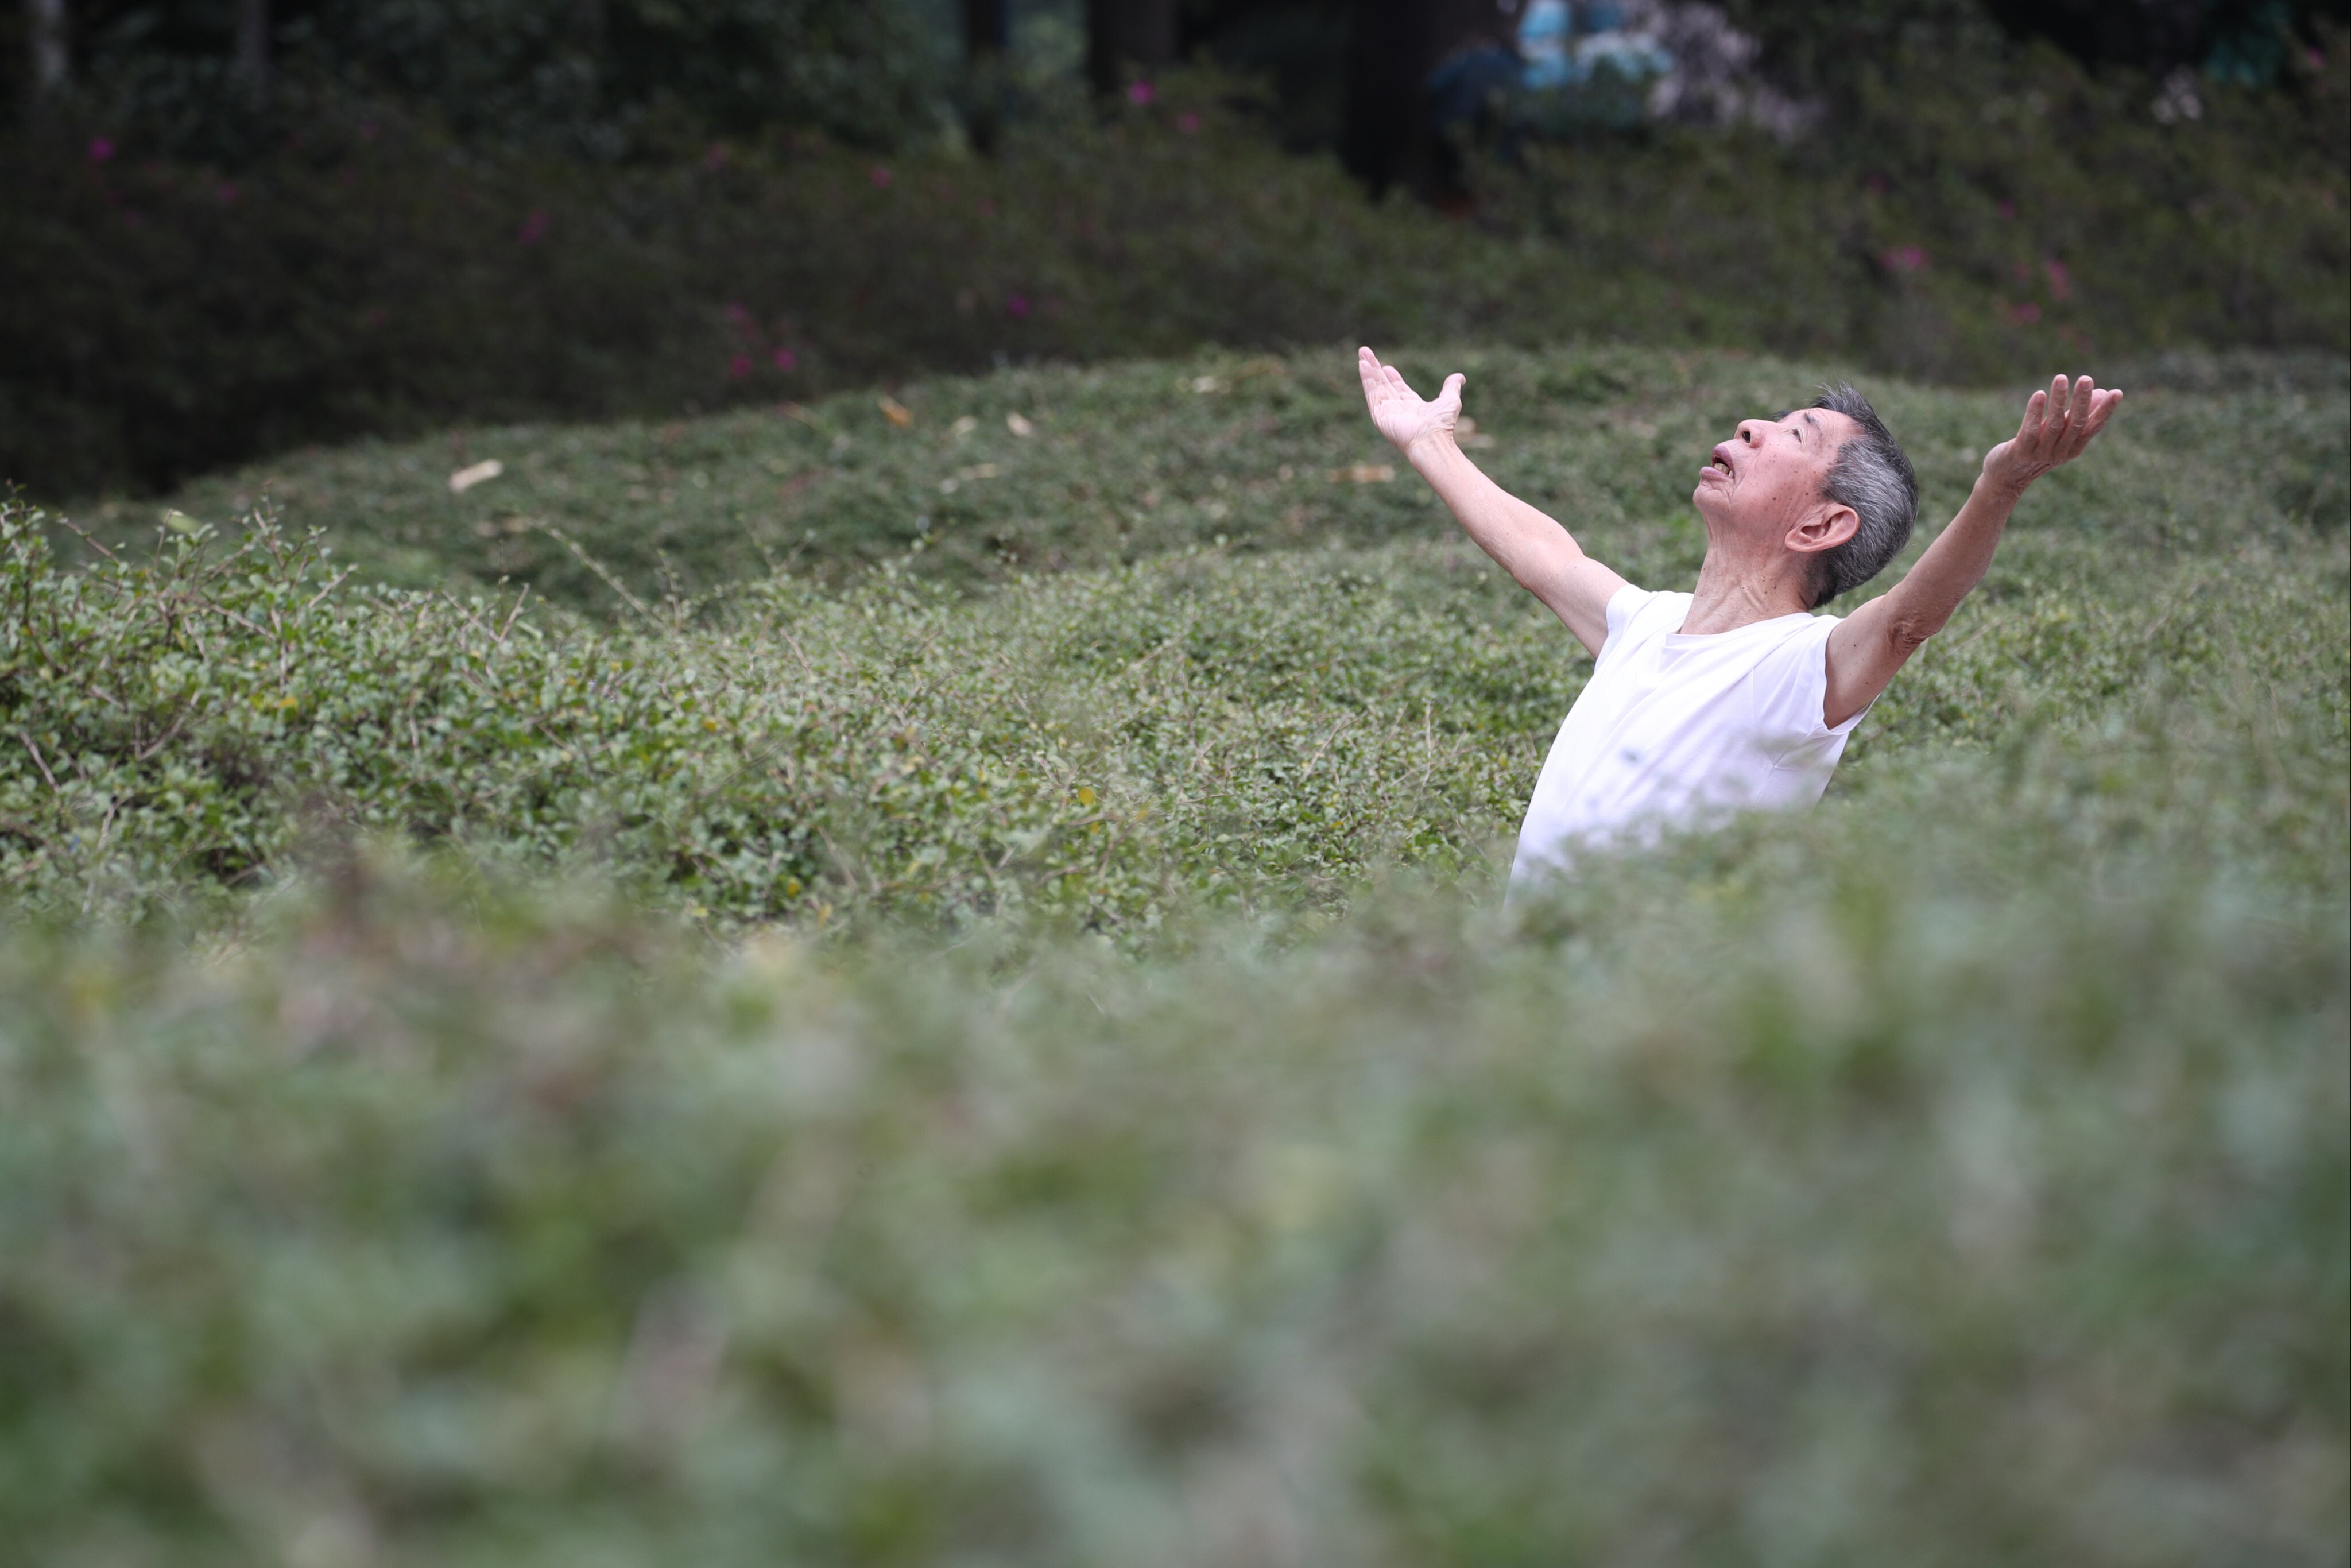 An elderly man exercises in Hong Kong’s Kowloon Park. While many workers may dream of retired life amid the stress of the pandemic, retirement can bring its own problems, including loss of routine. Photo: Edmond So